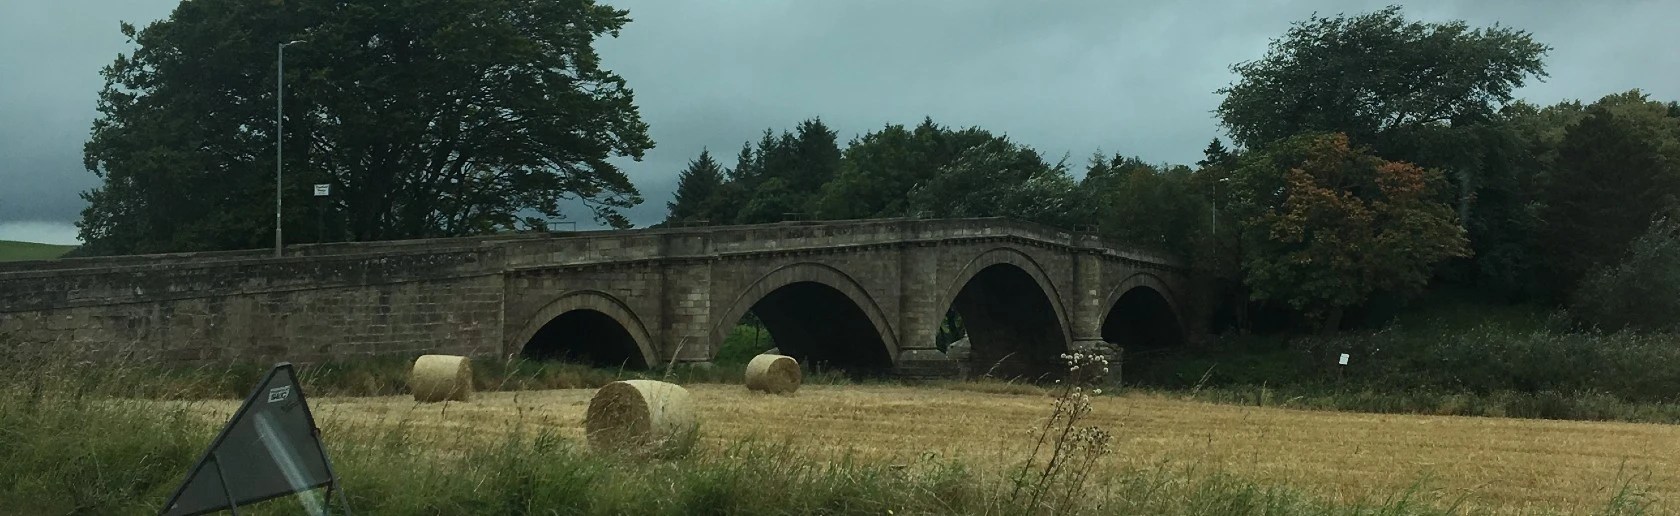 Landscape view of hay bales in a field with an old stone bridge and trees in the distance